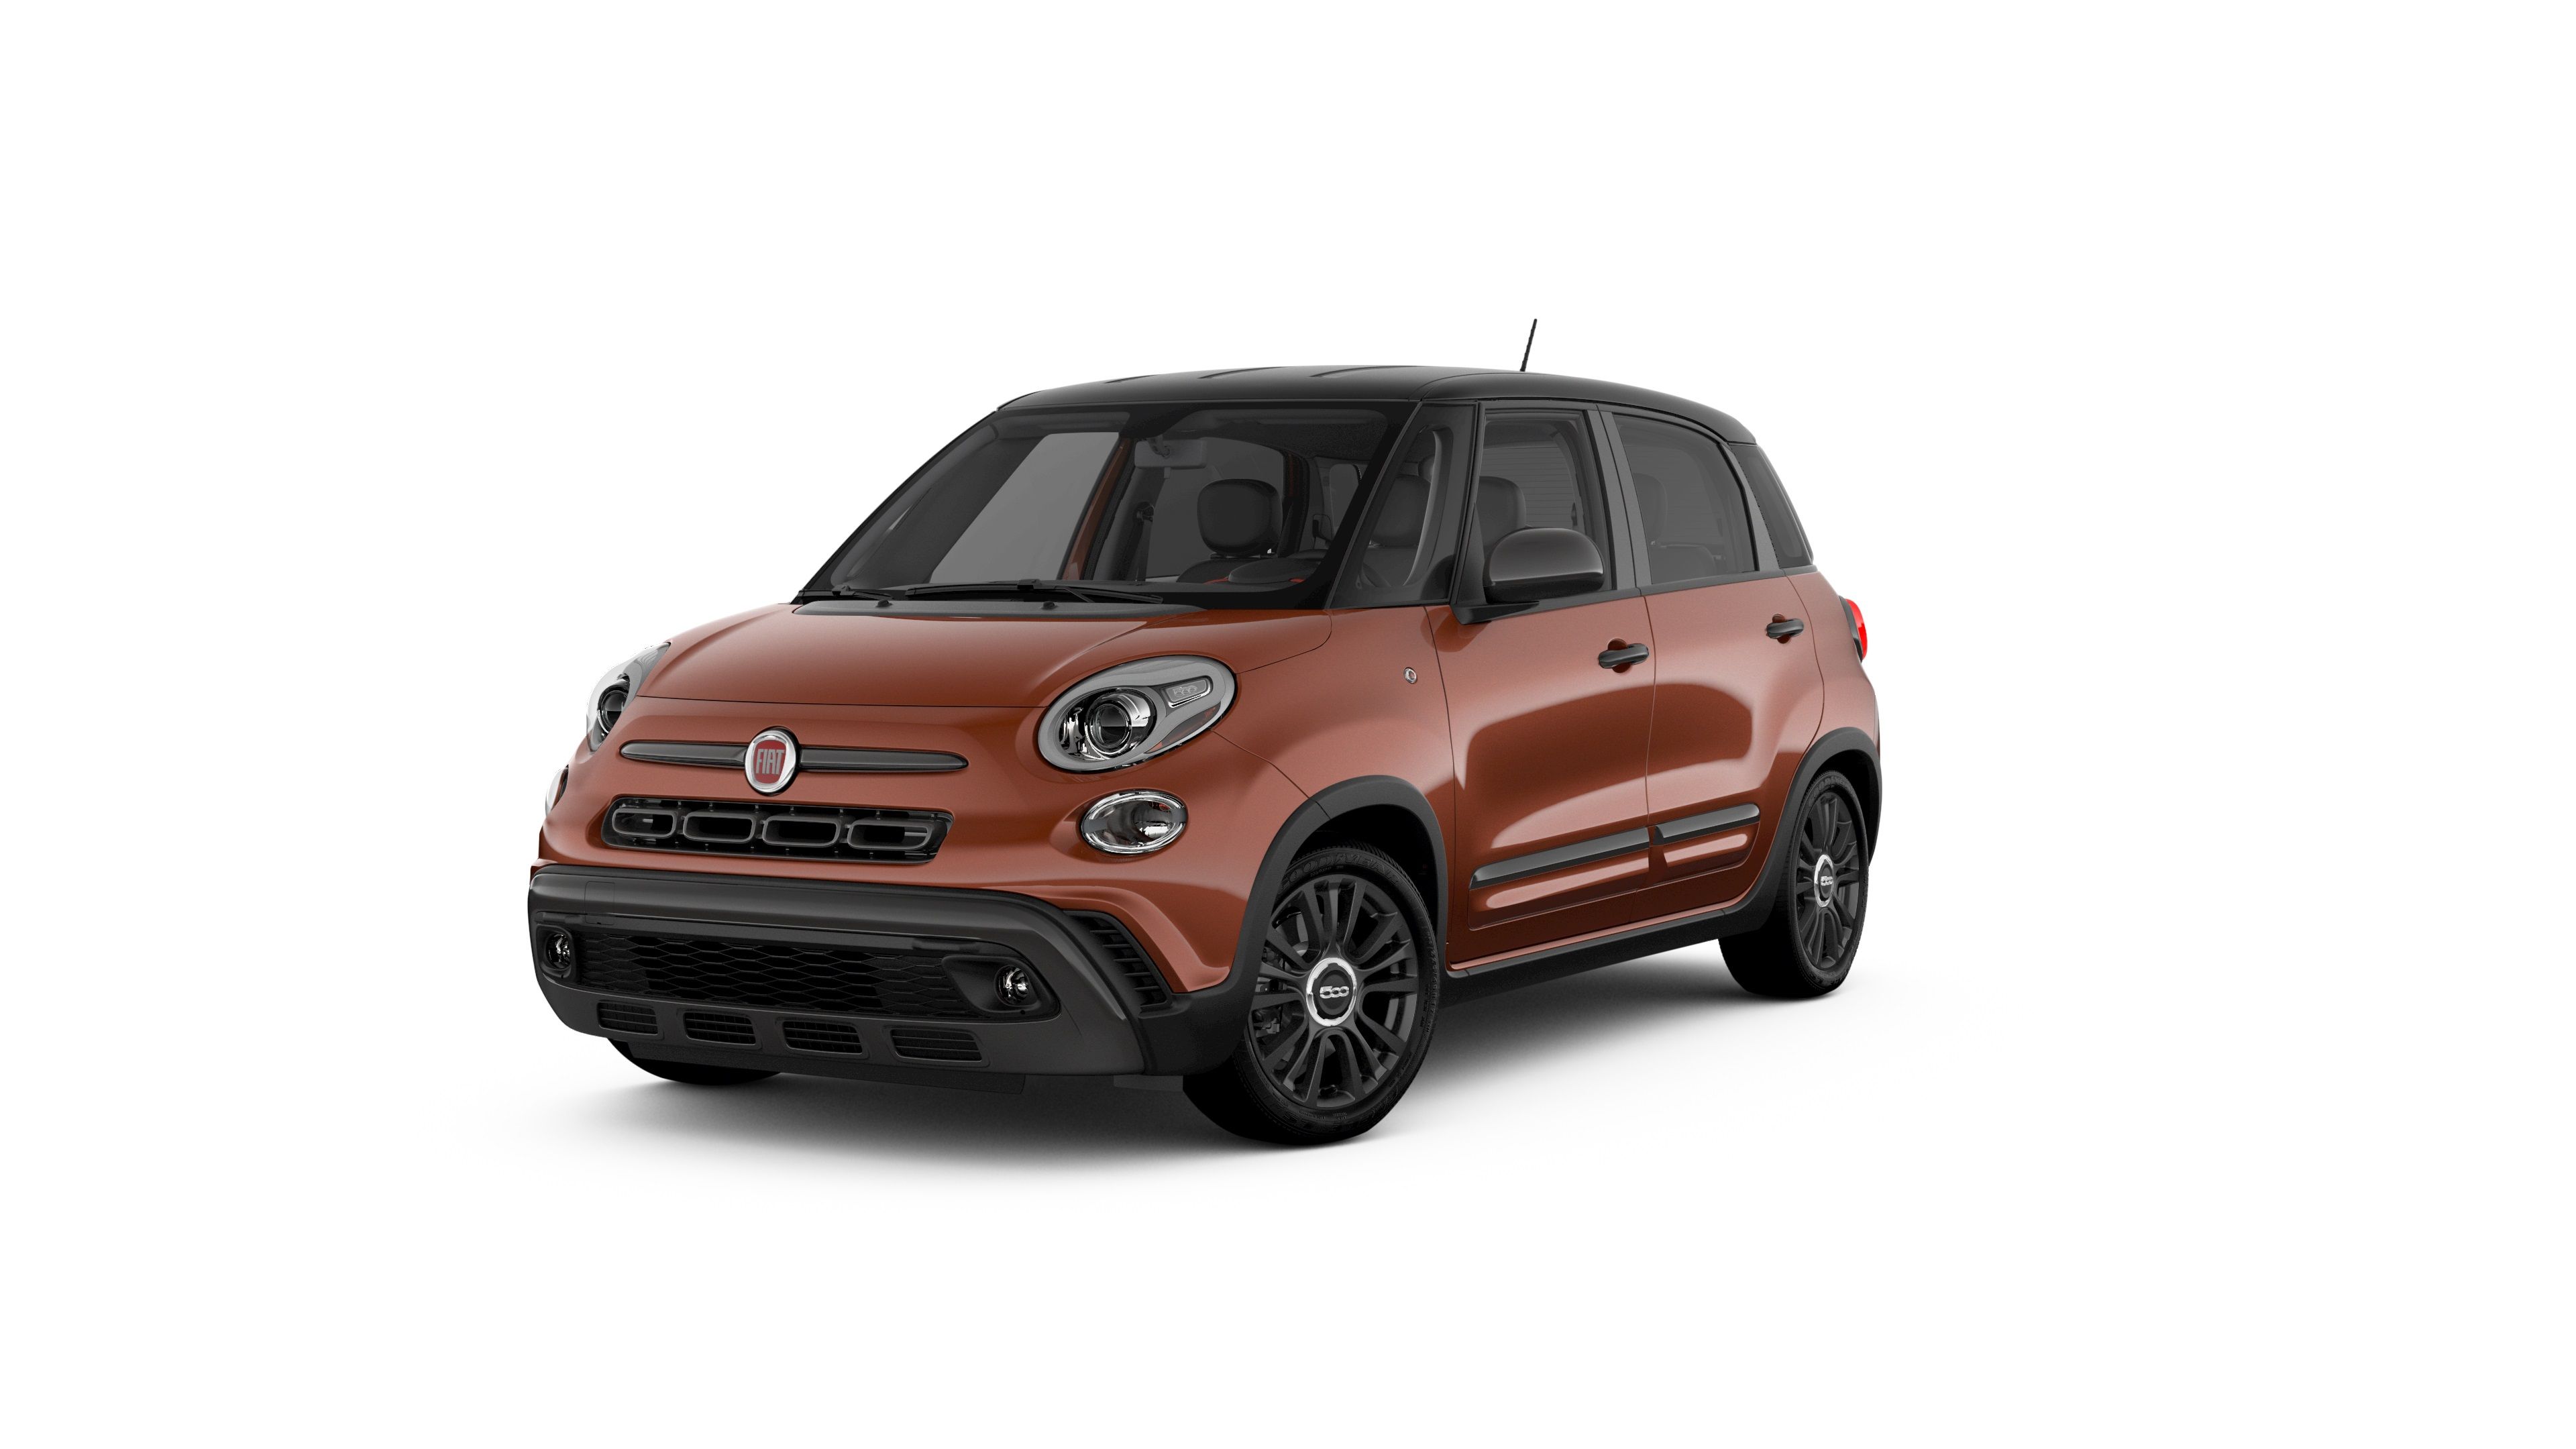 2020 Fiat 500L Review, Pricing, and Specs